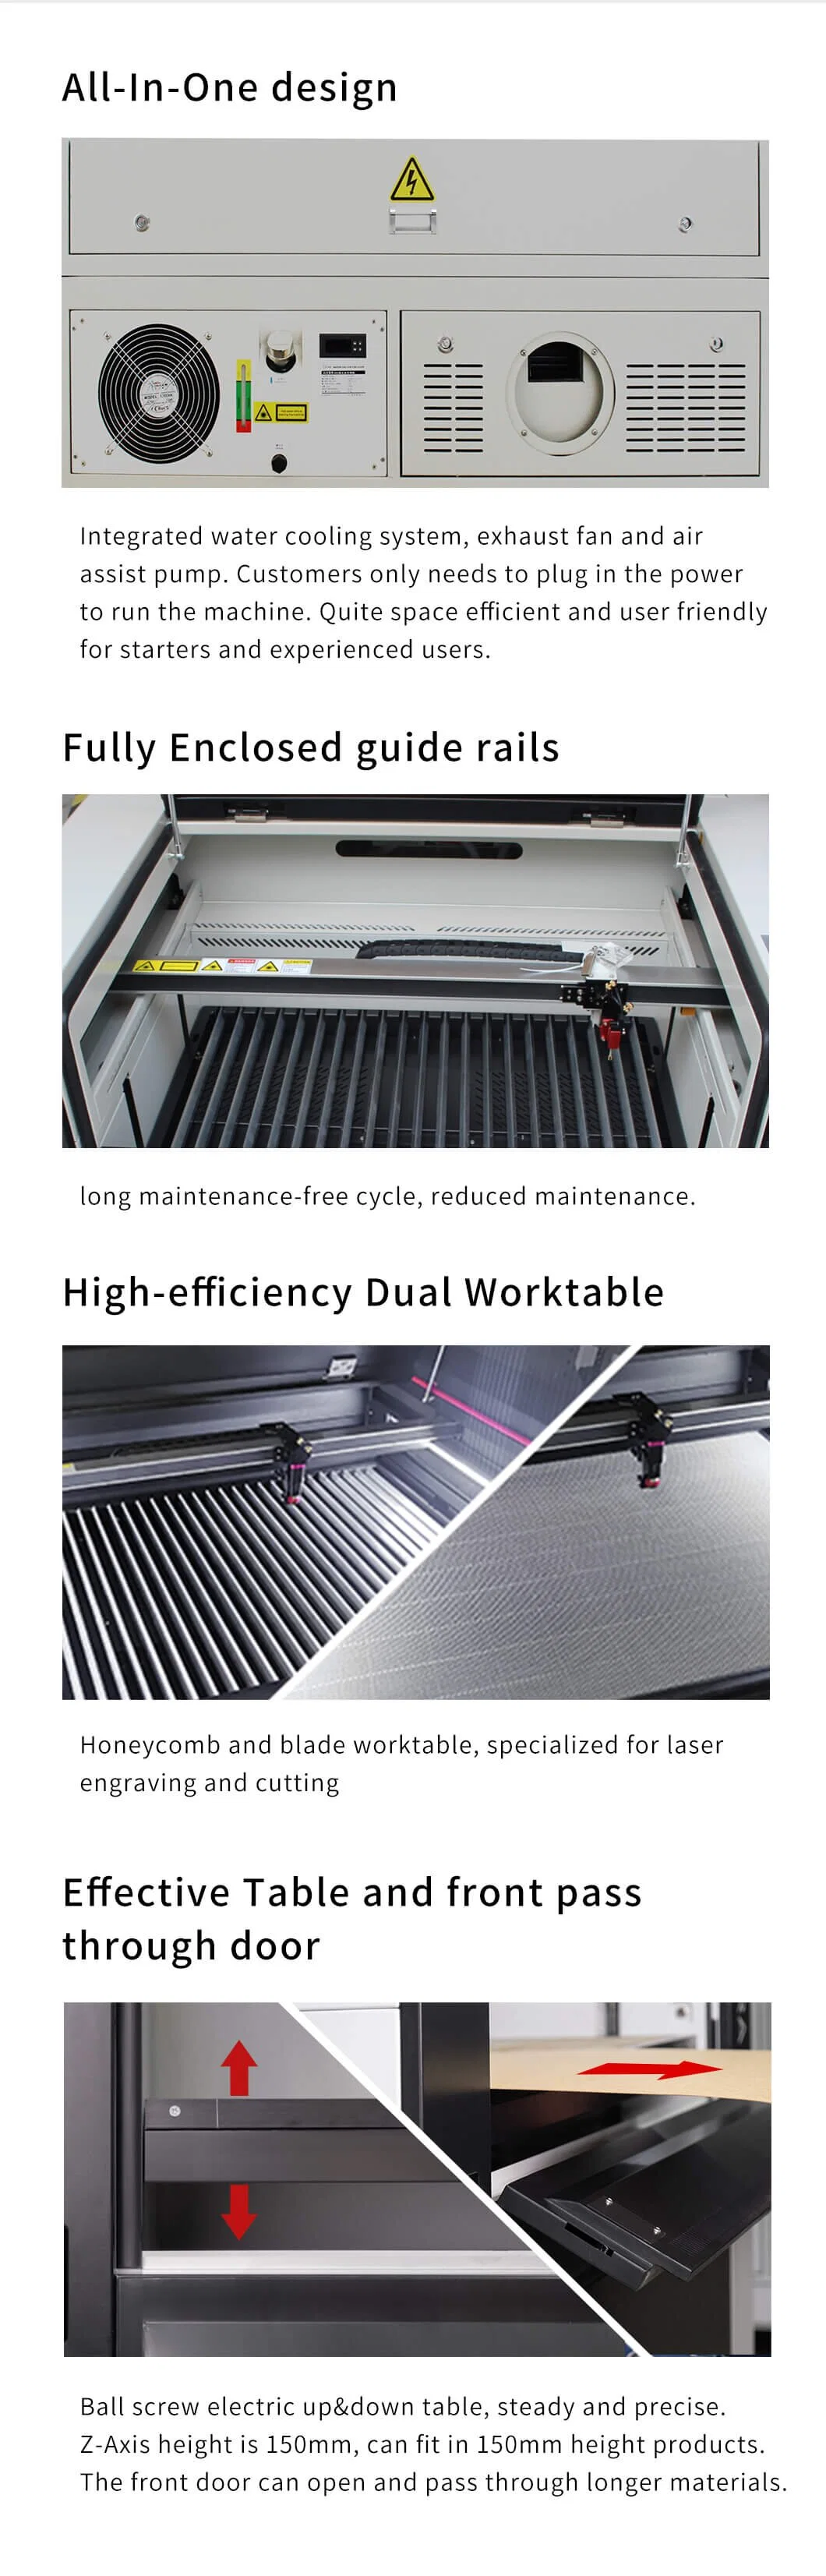 Aeon Hot Sale Double Worktable with Lifting CNC Laser Machine for Acrylic MDF Desktop Laser Cutter with CE FDA SGS Certification